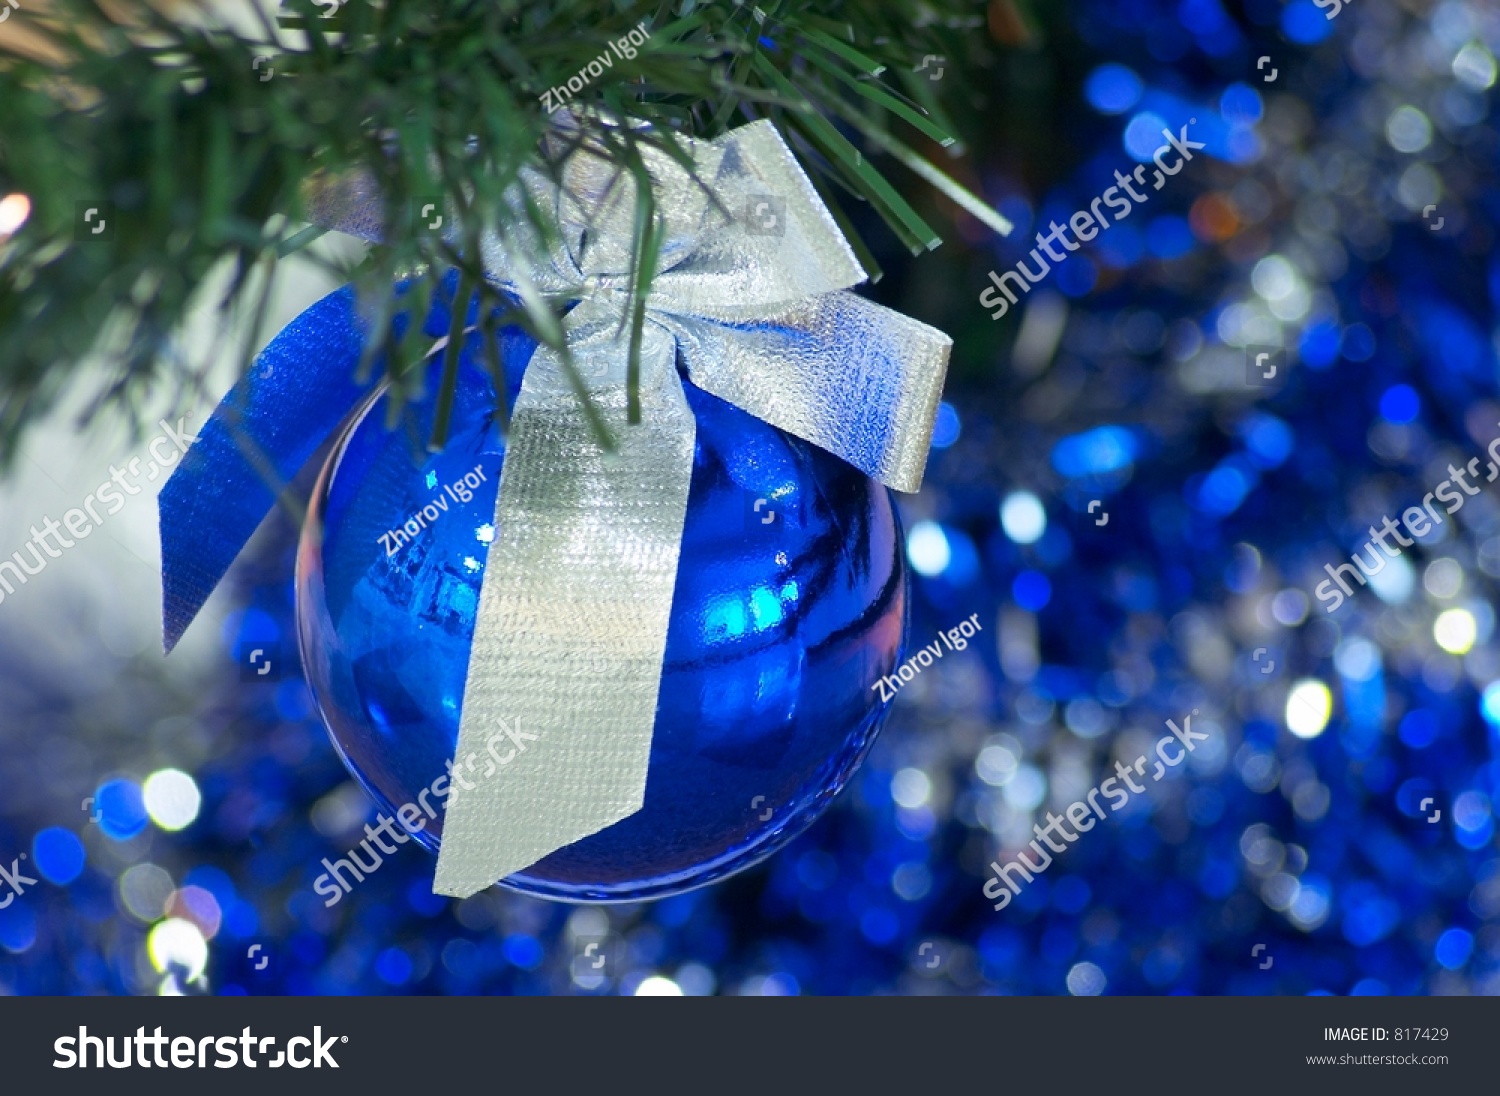 Blue christmas ball with silver ribbon #817429